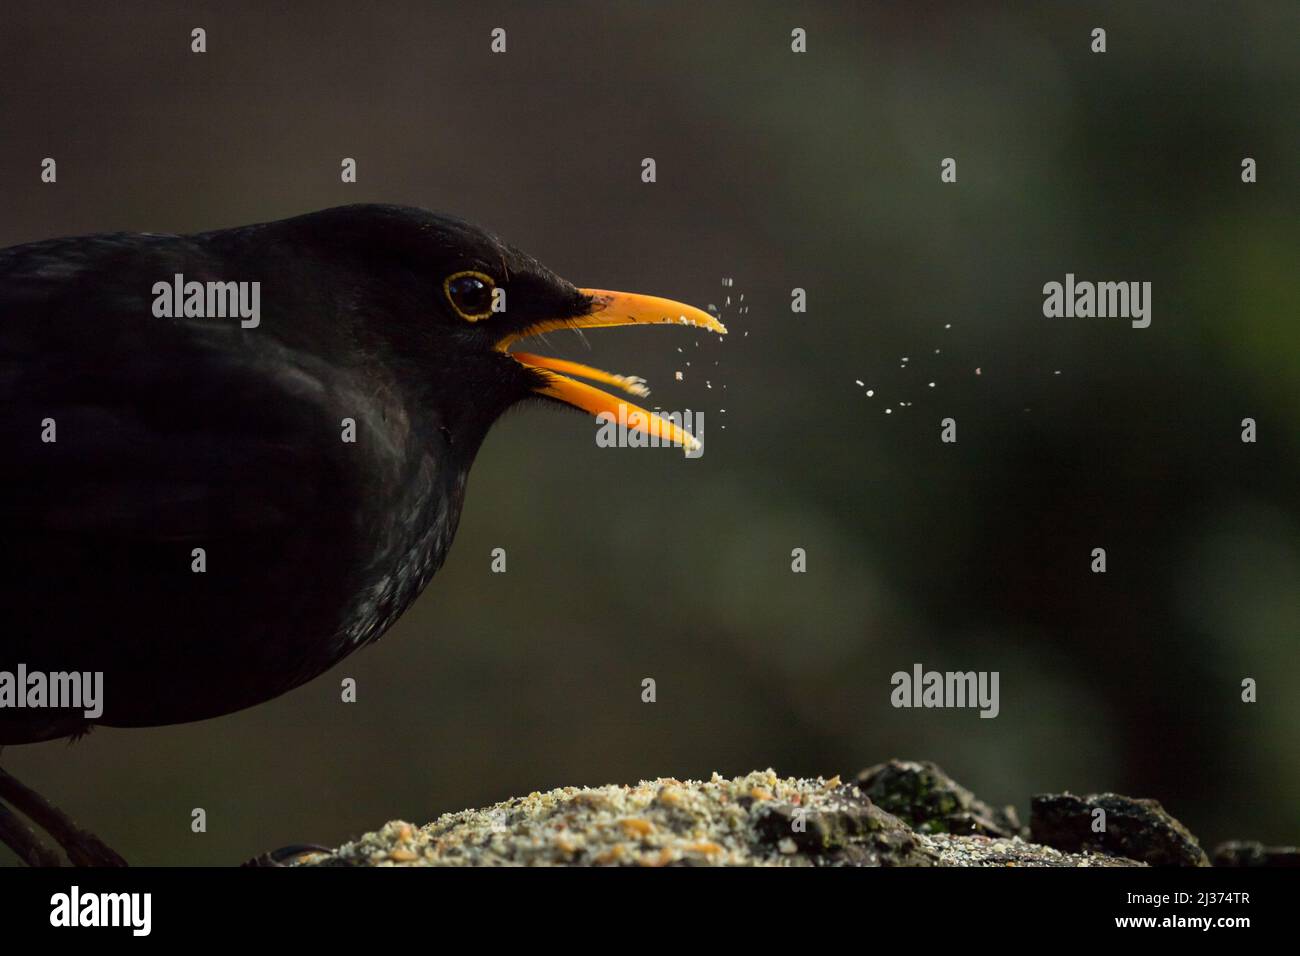 Side-view of a male blackbird with a bright yellow beak spitting out crumbs of bird food while perched on a rock. Stock Photo